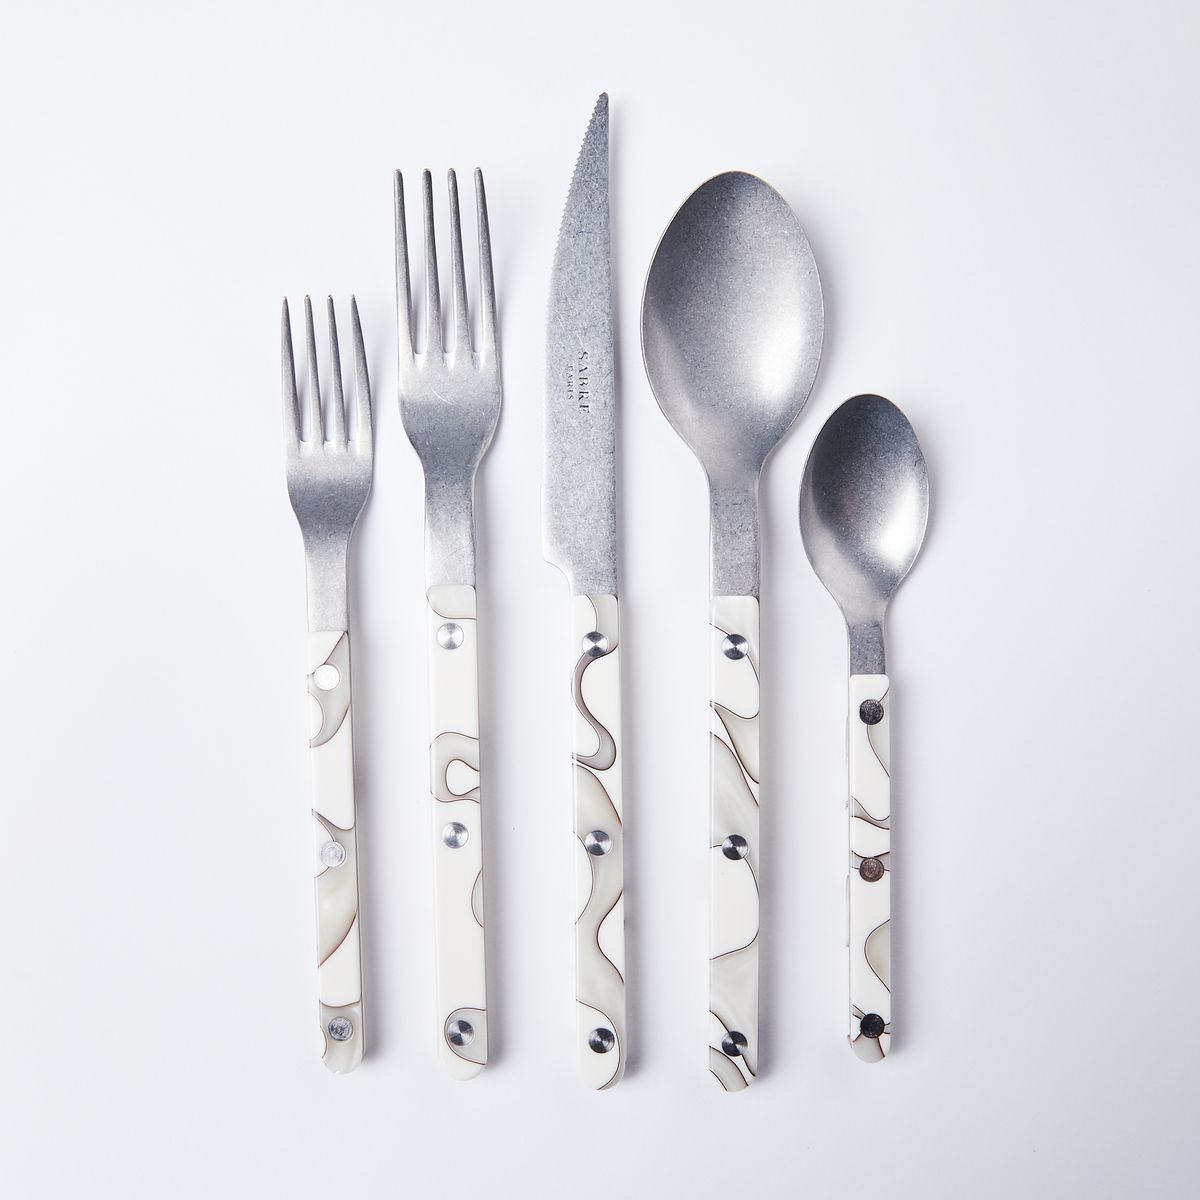 A group of silver, white and gray cutlery (salad fork, dinner fork, knife, soup spoon and teaspoon)